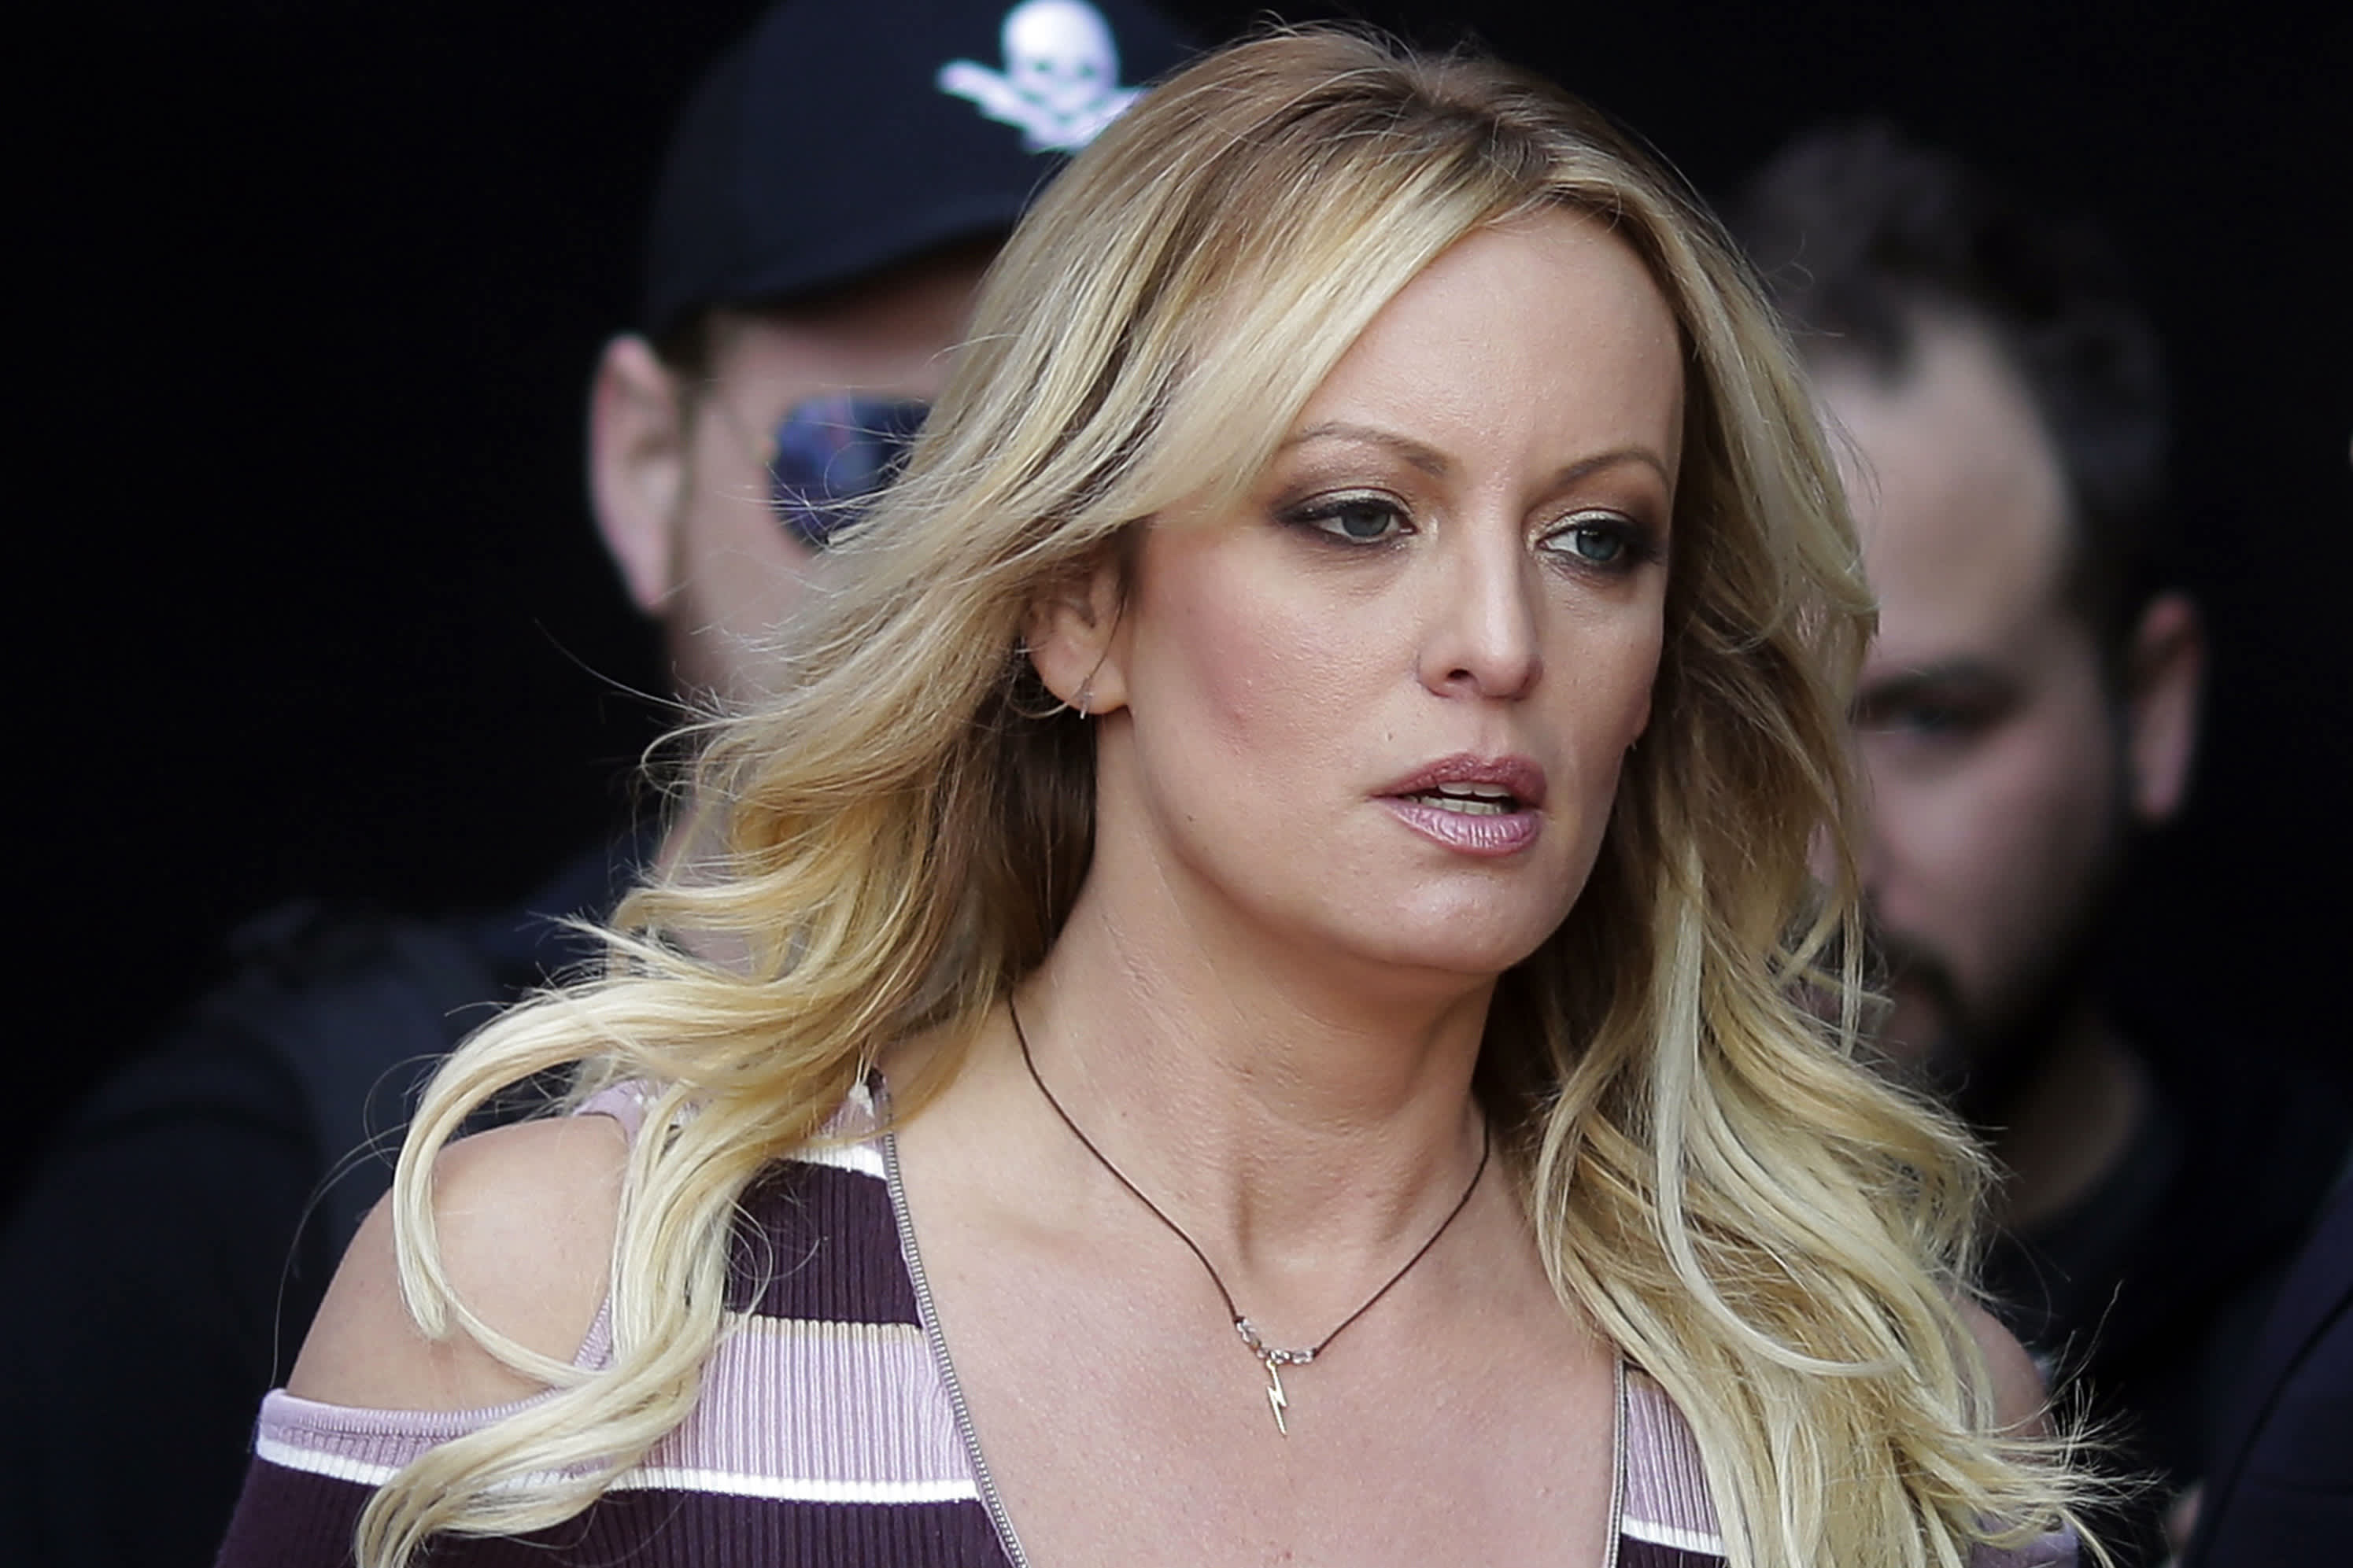 Trump probe Porn star Stormy Daniels says shell dance if hes jailed pic